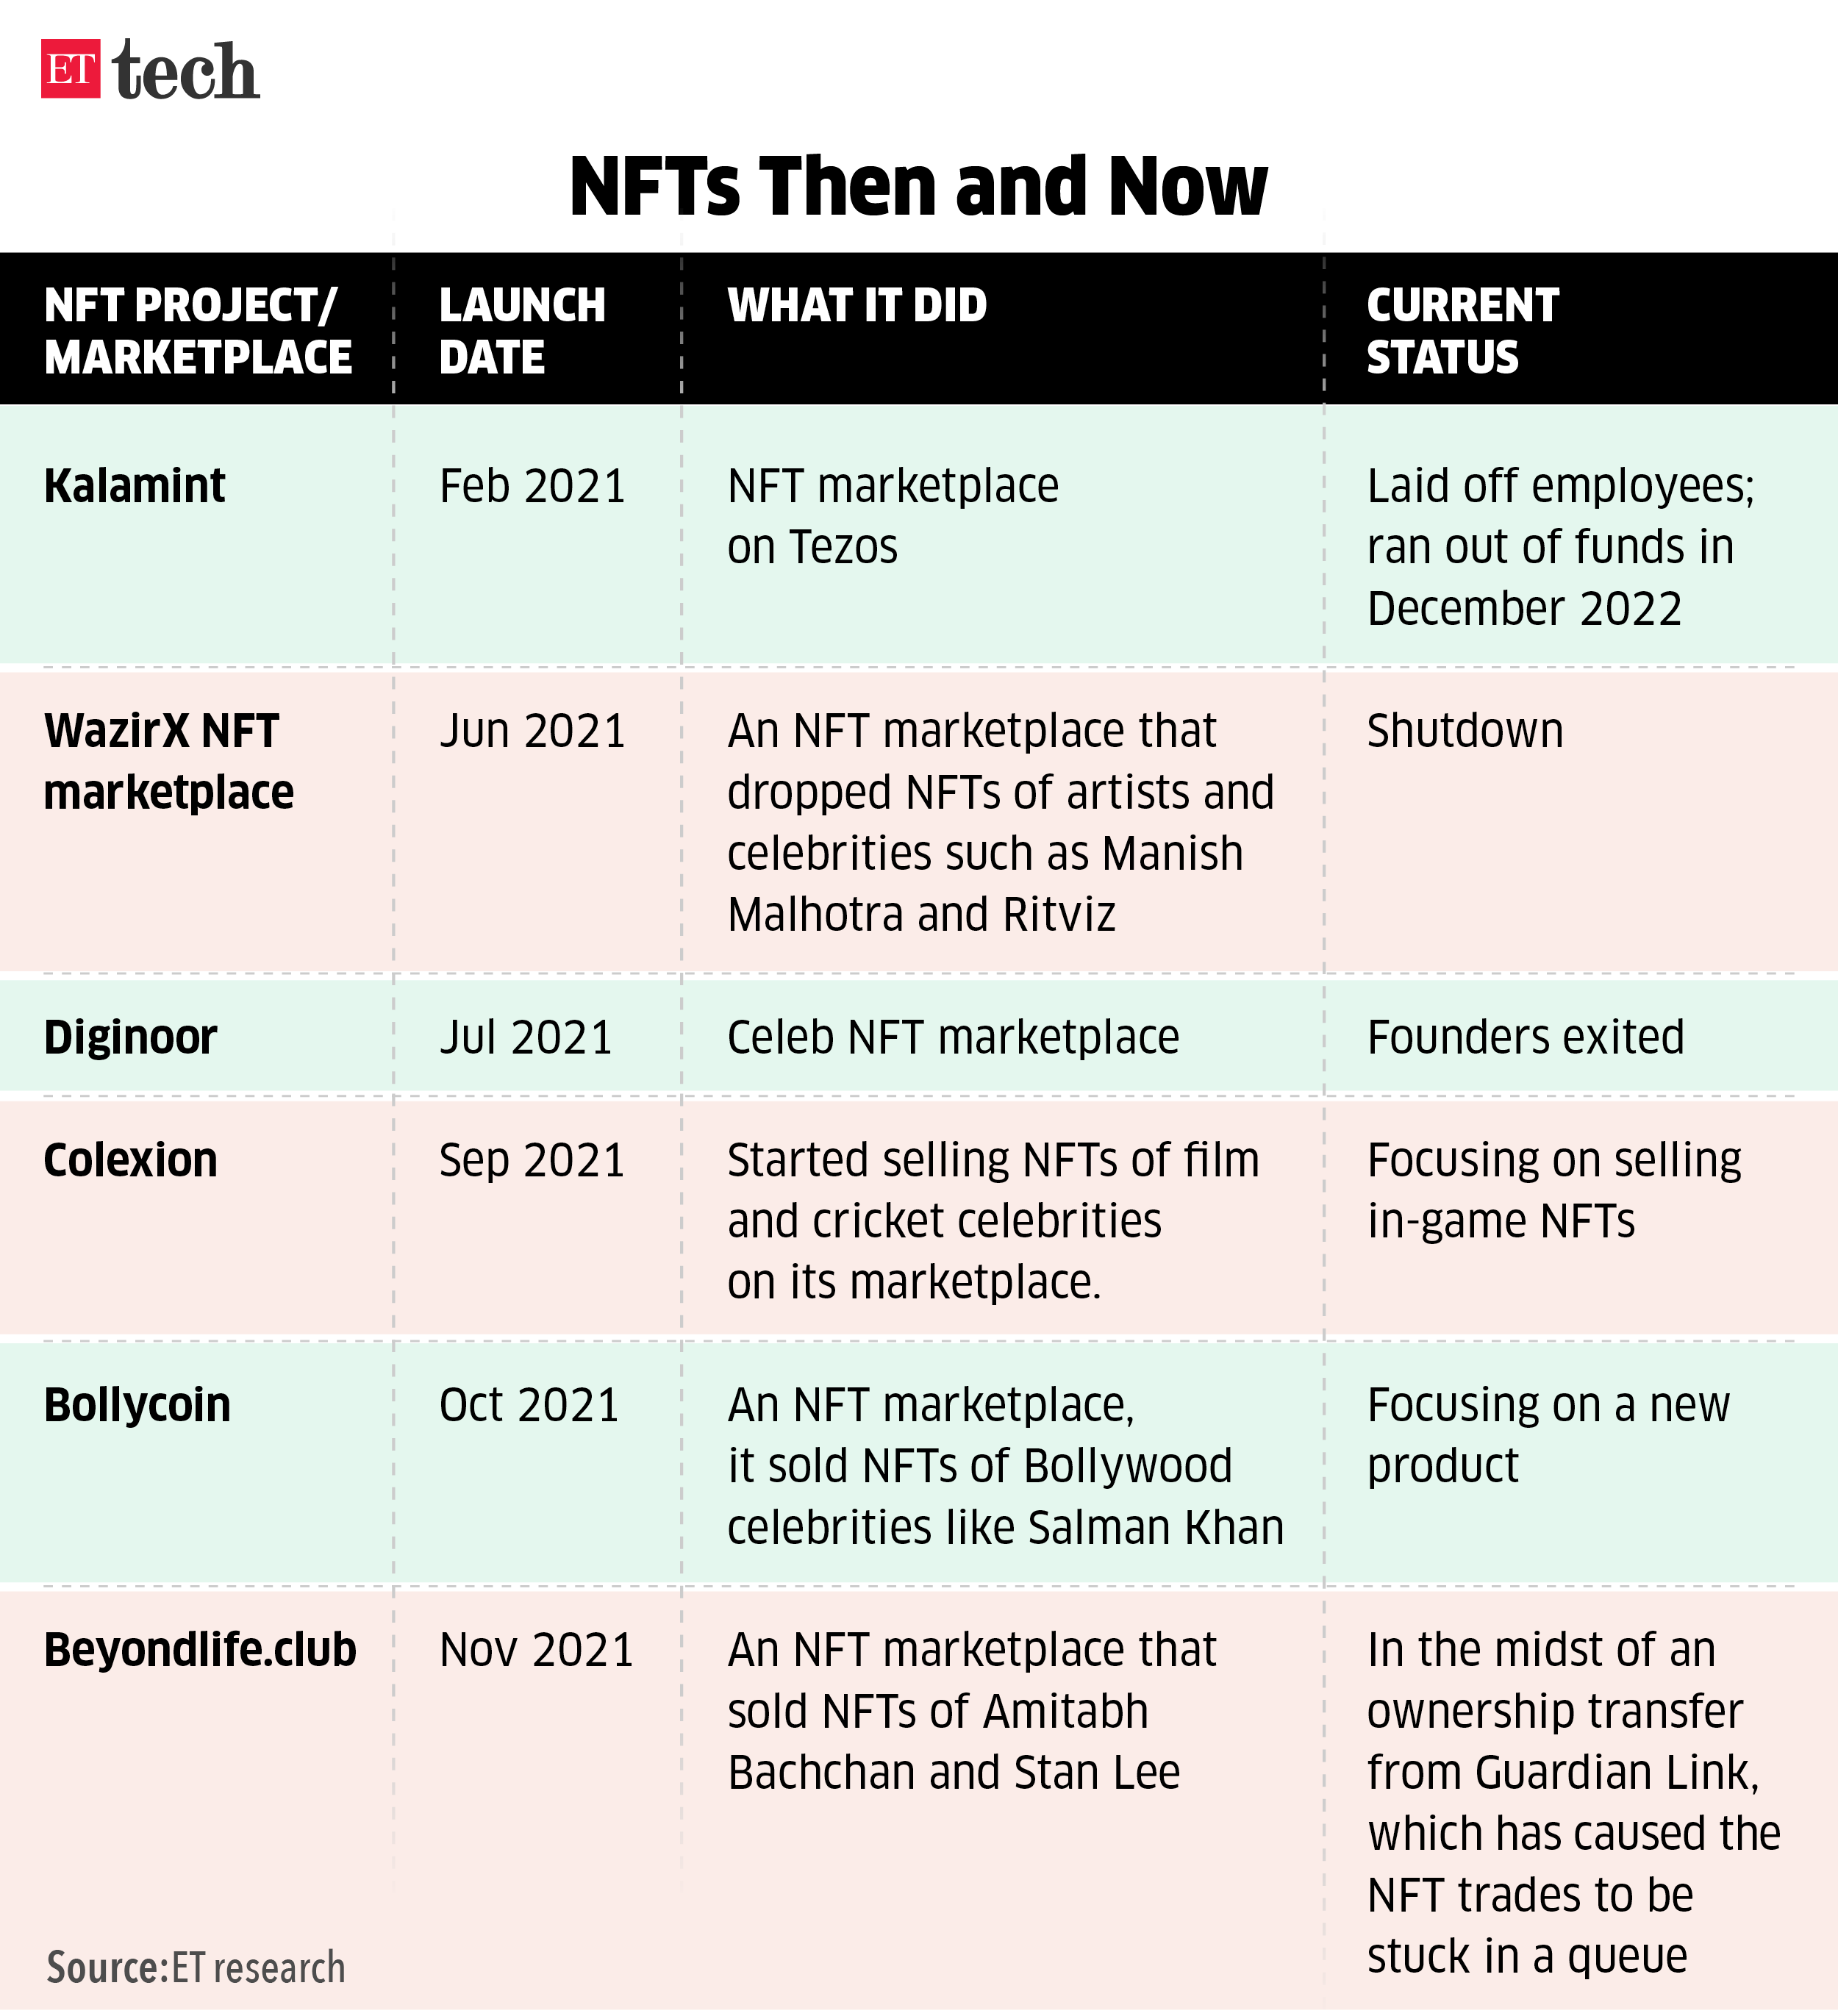 Deep Dive: NFT ecosystem as it shifts focus from filmi trifles to utility